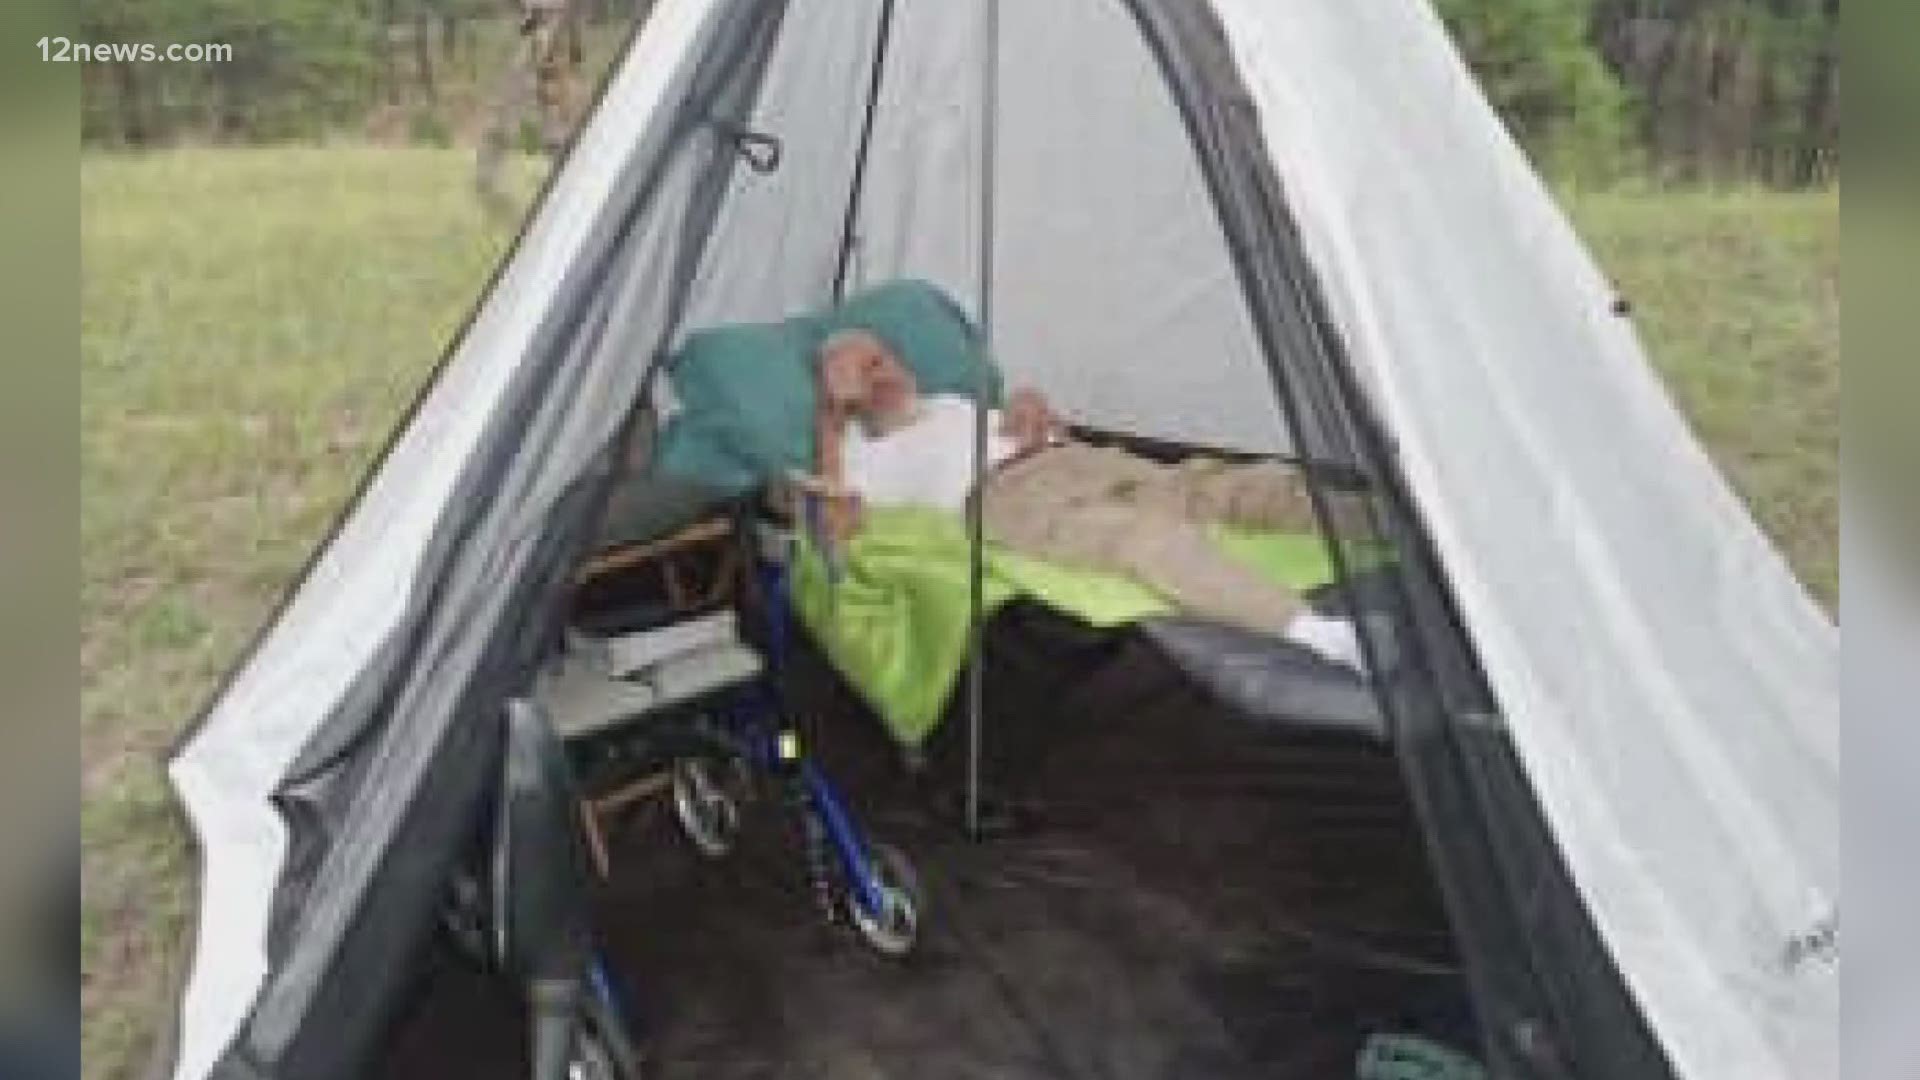 One Valley veteran has found the perfect way to cure his cabin fever... go camping! Days after being released from the hospital, James McCollum, did just that.